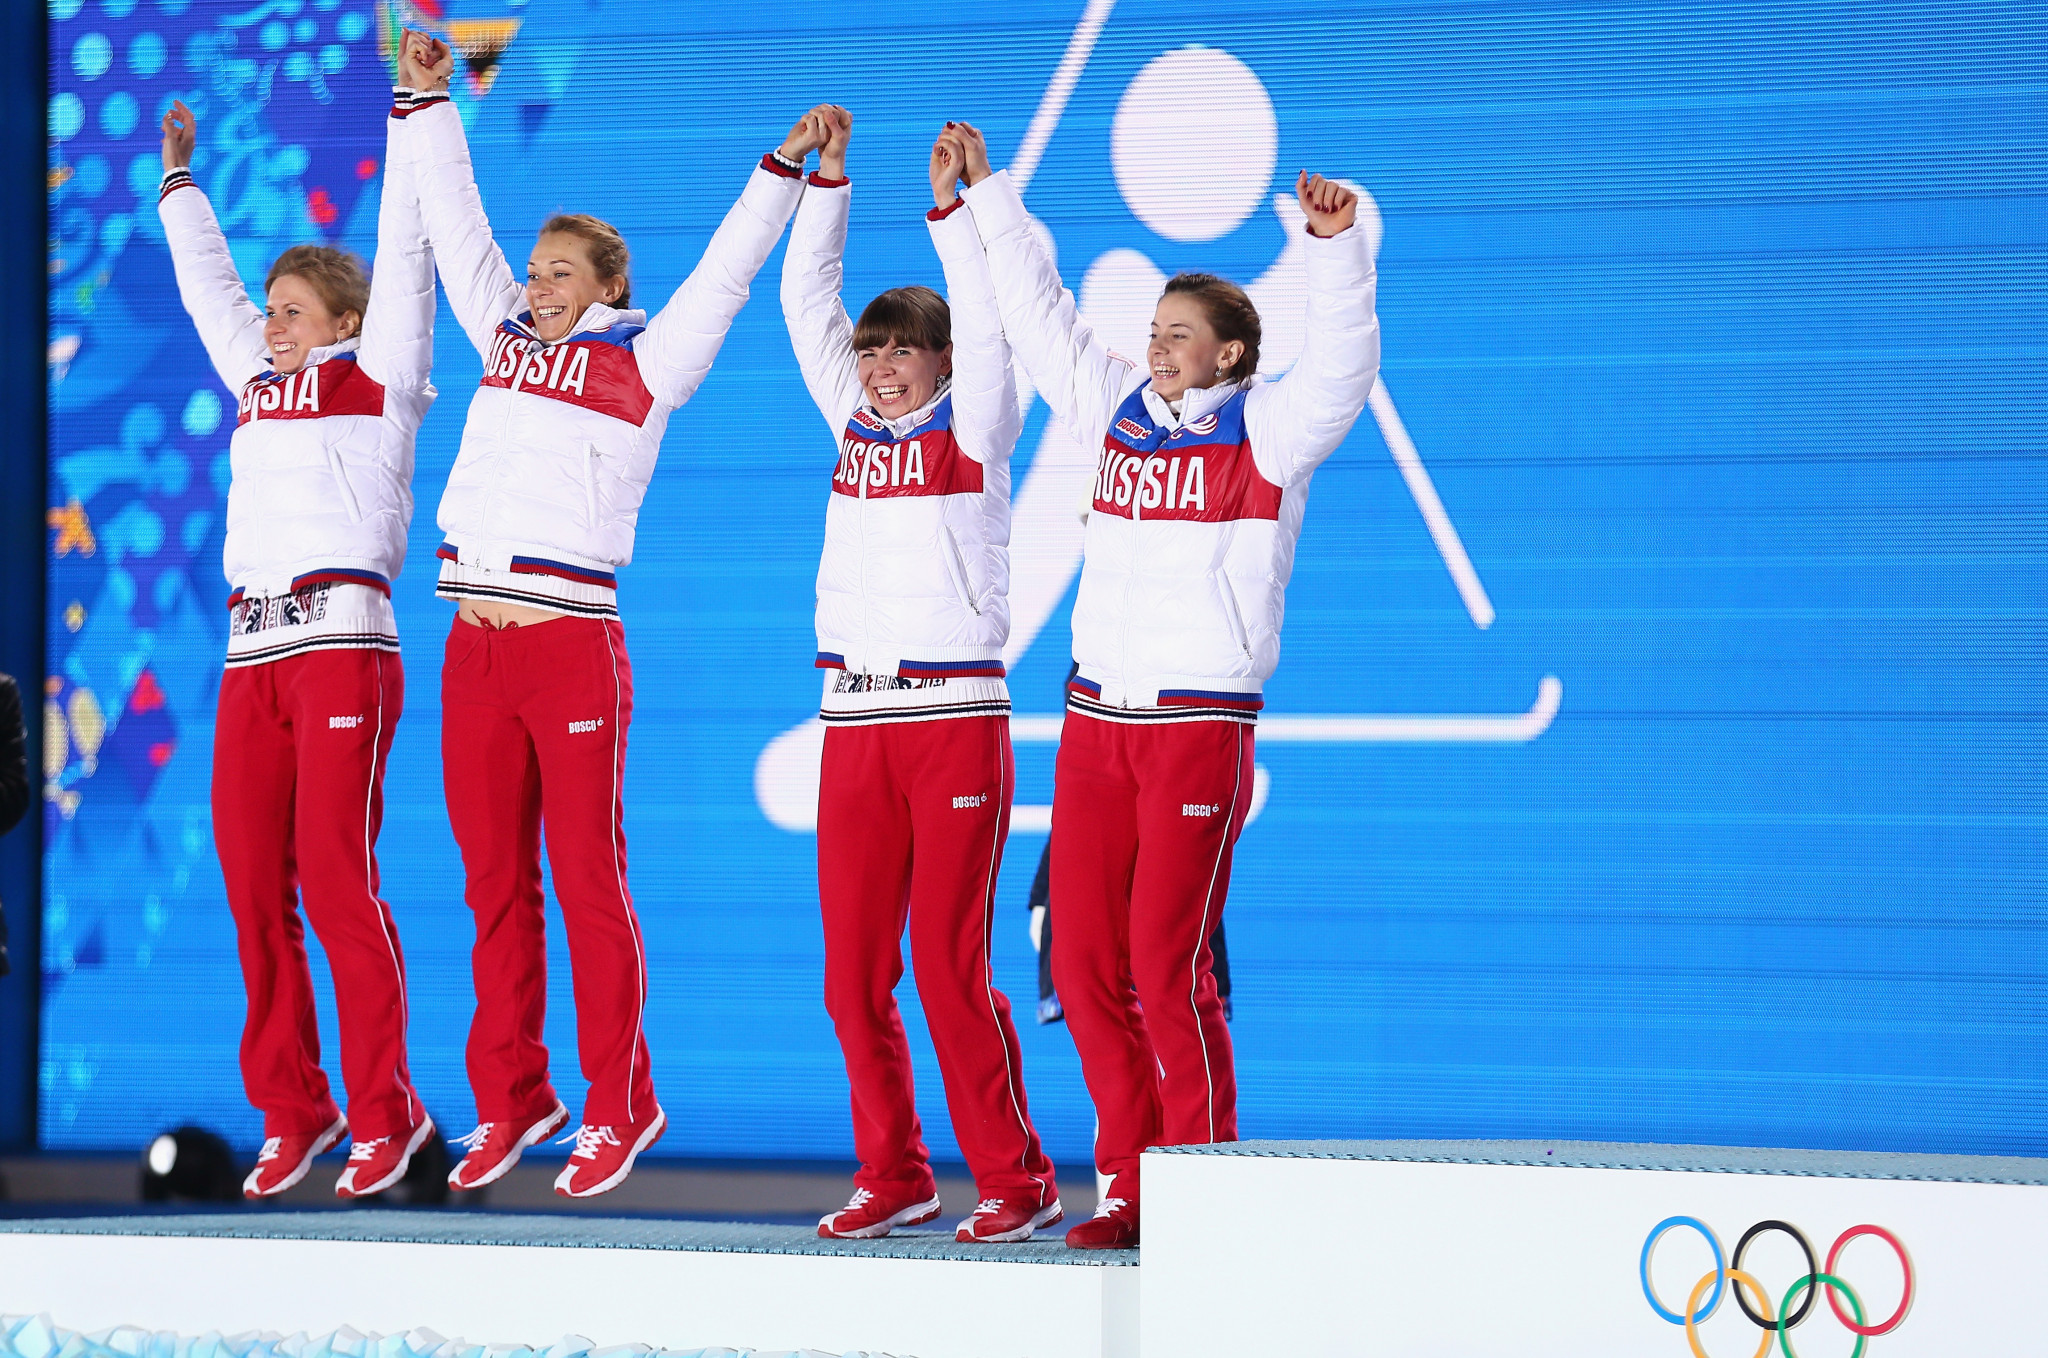 Russia celebrate their Olympic silver medals in the 4x6km women's biathlon at Sochi 2014 but have now been stripped of them due to doping ©Getty Images